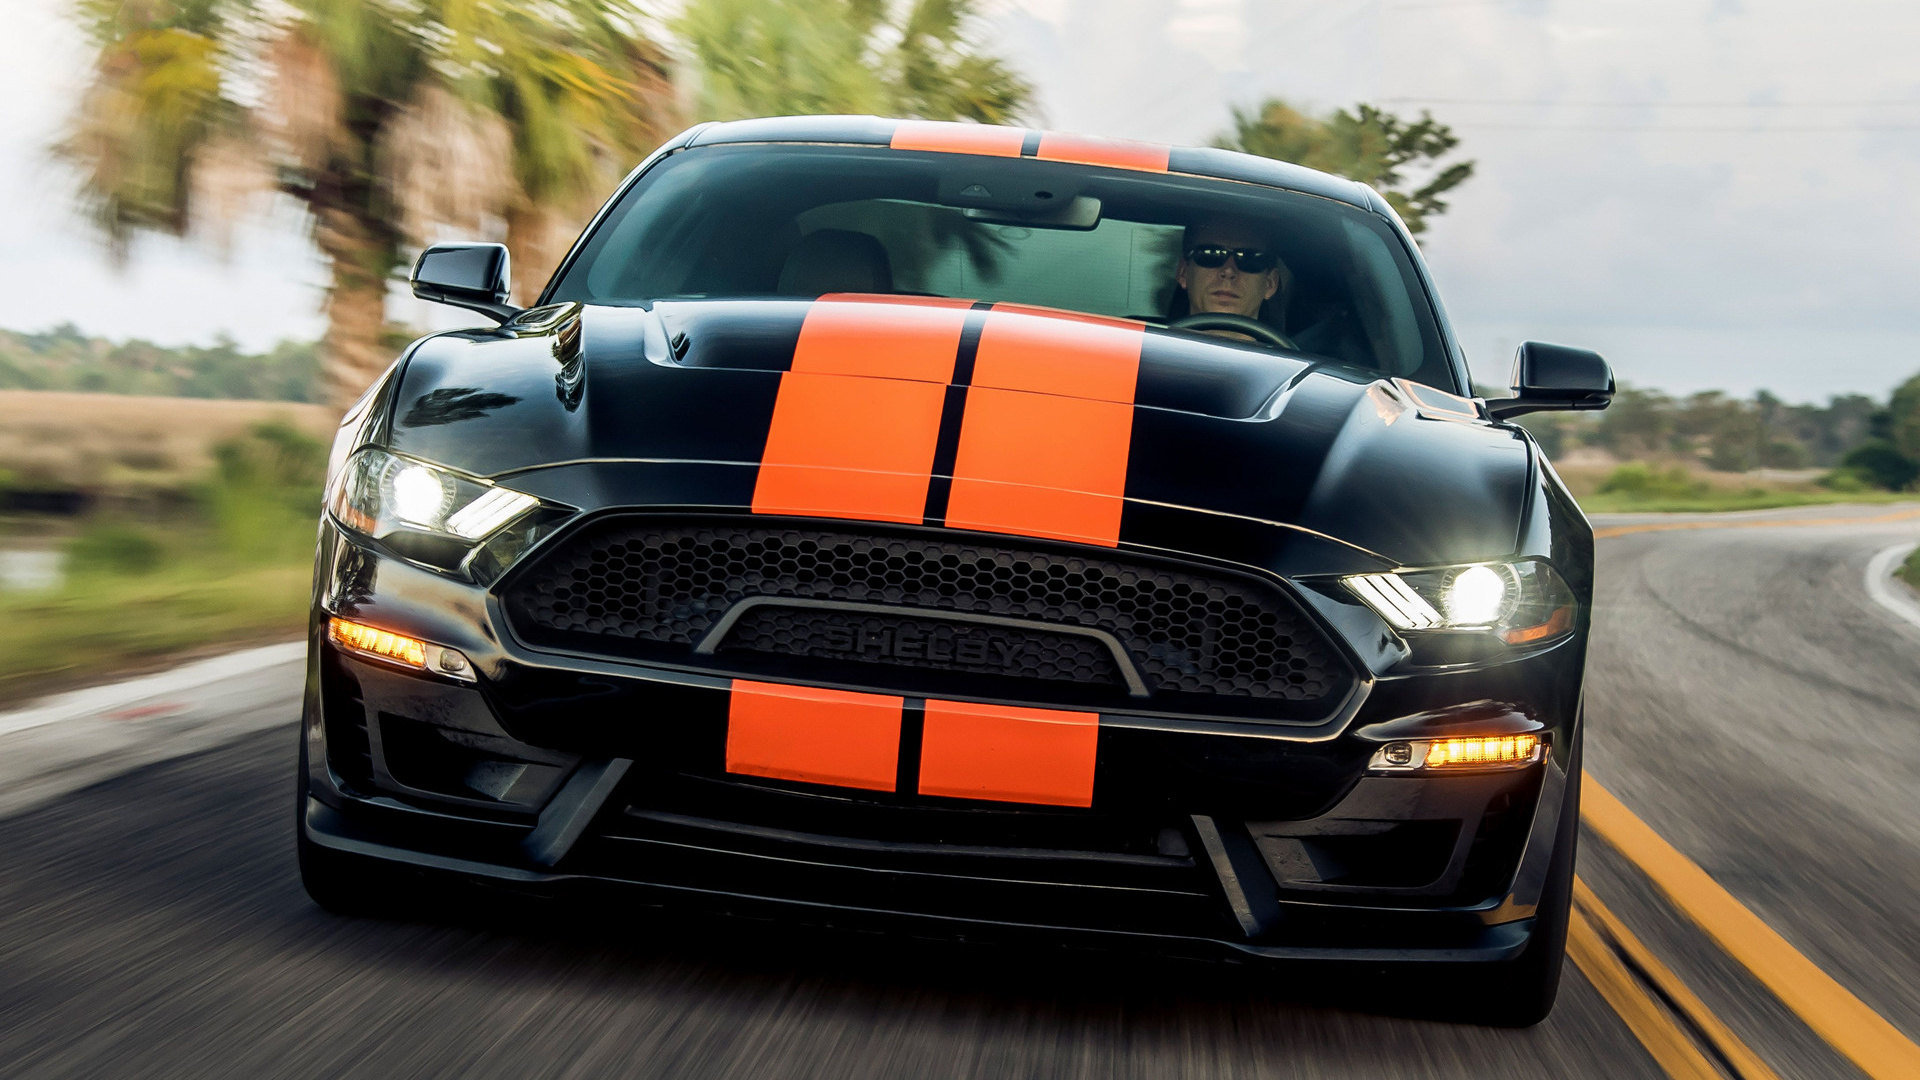 Mustang Of The Day: 2019 Ford Mustang Shelby GT-S